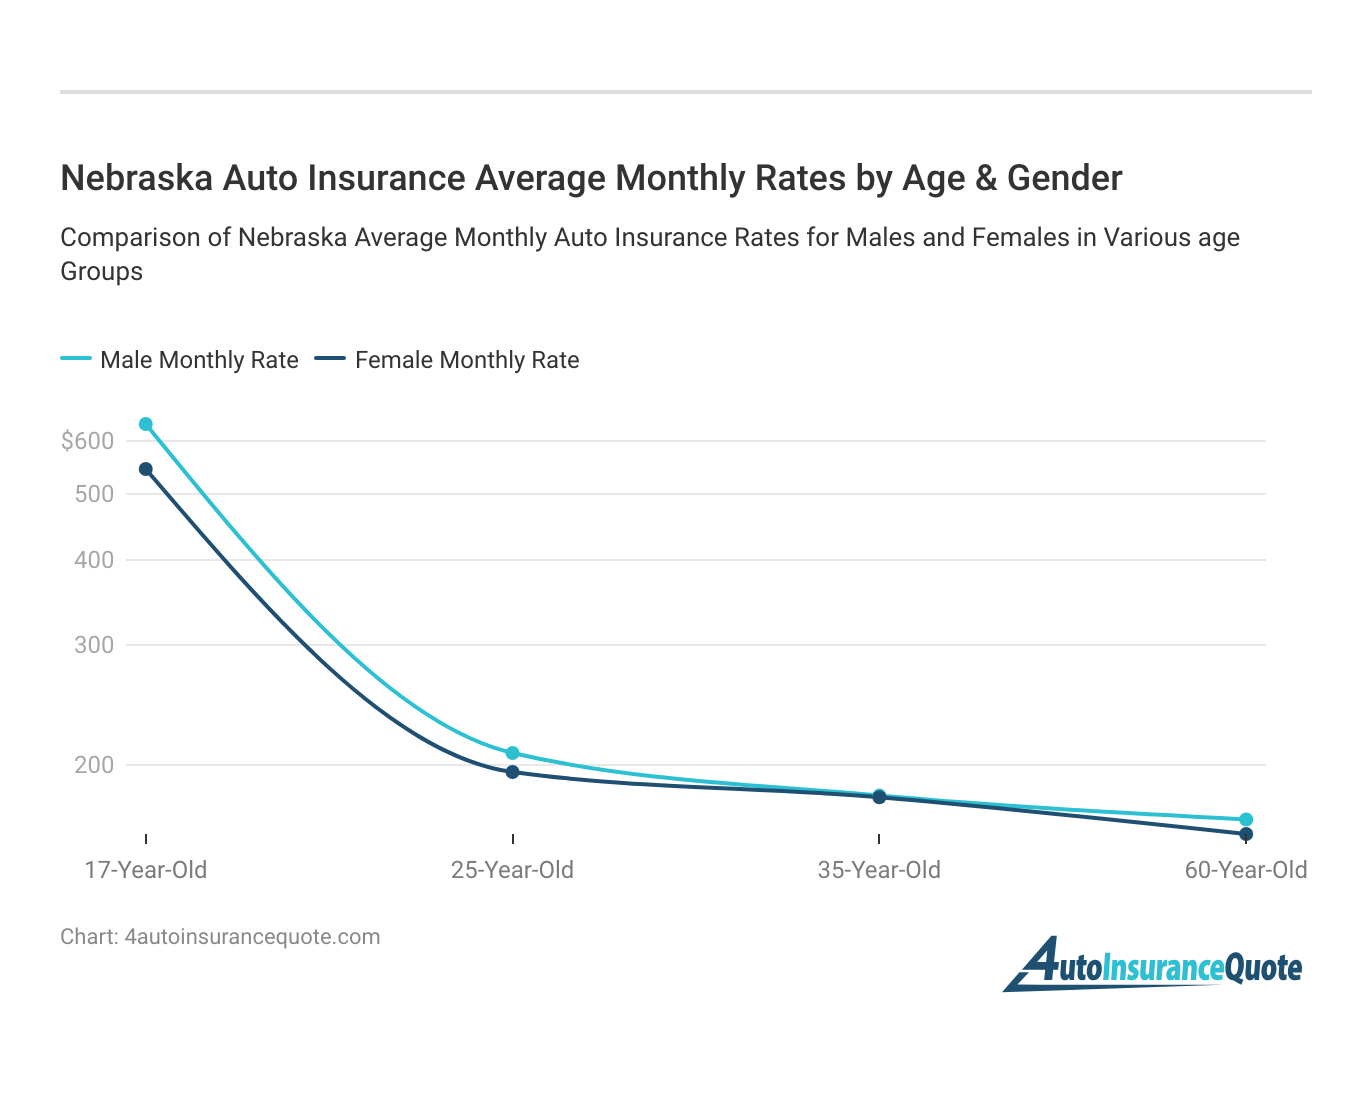 <h3>Nebraska Auto Insurance Average Monthly Rates by Age & Gender</h3>